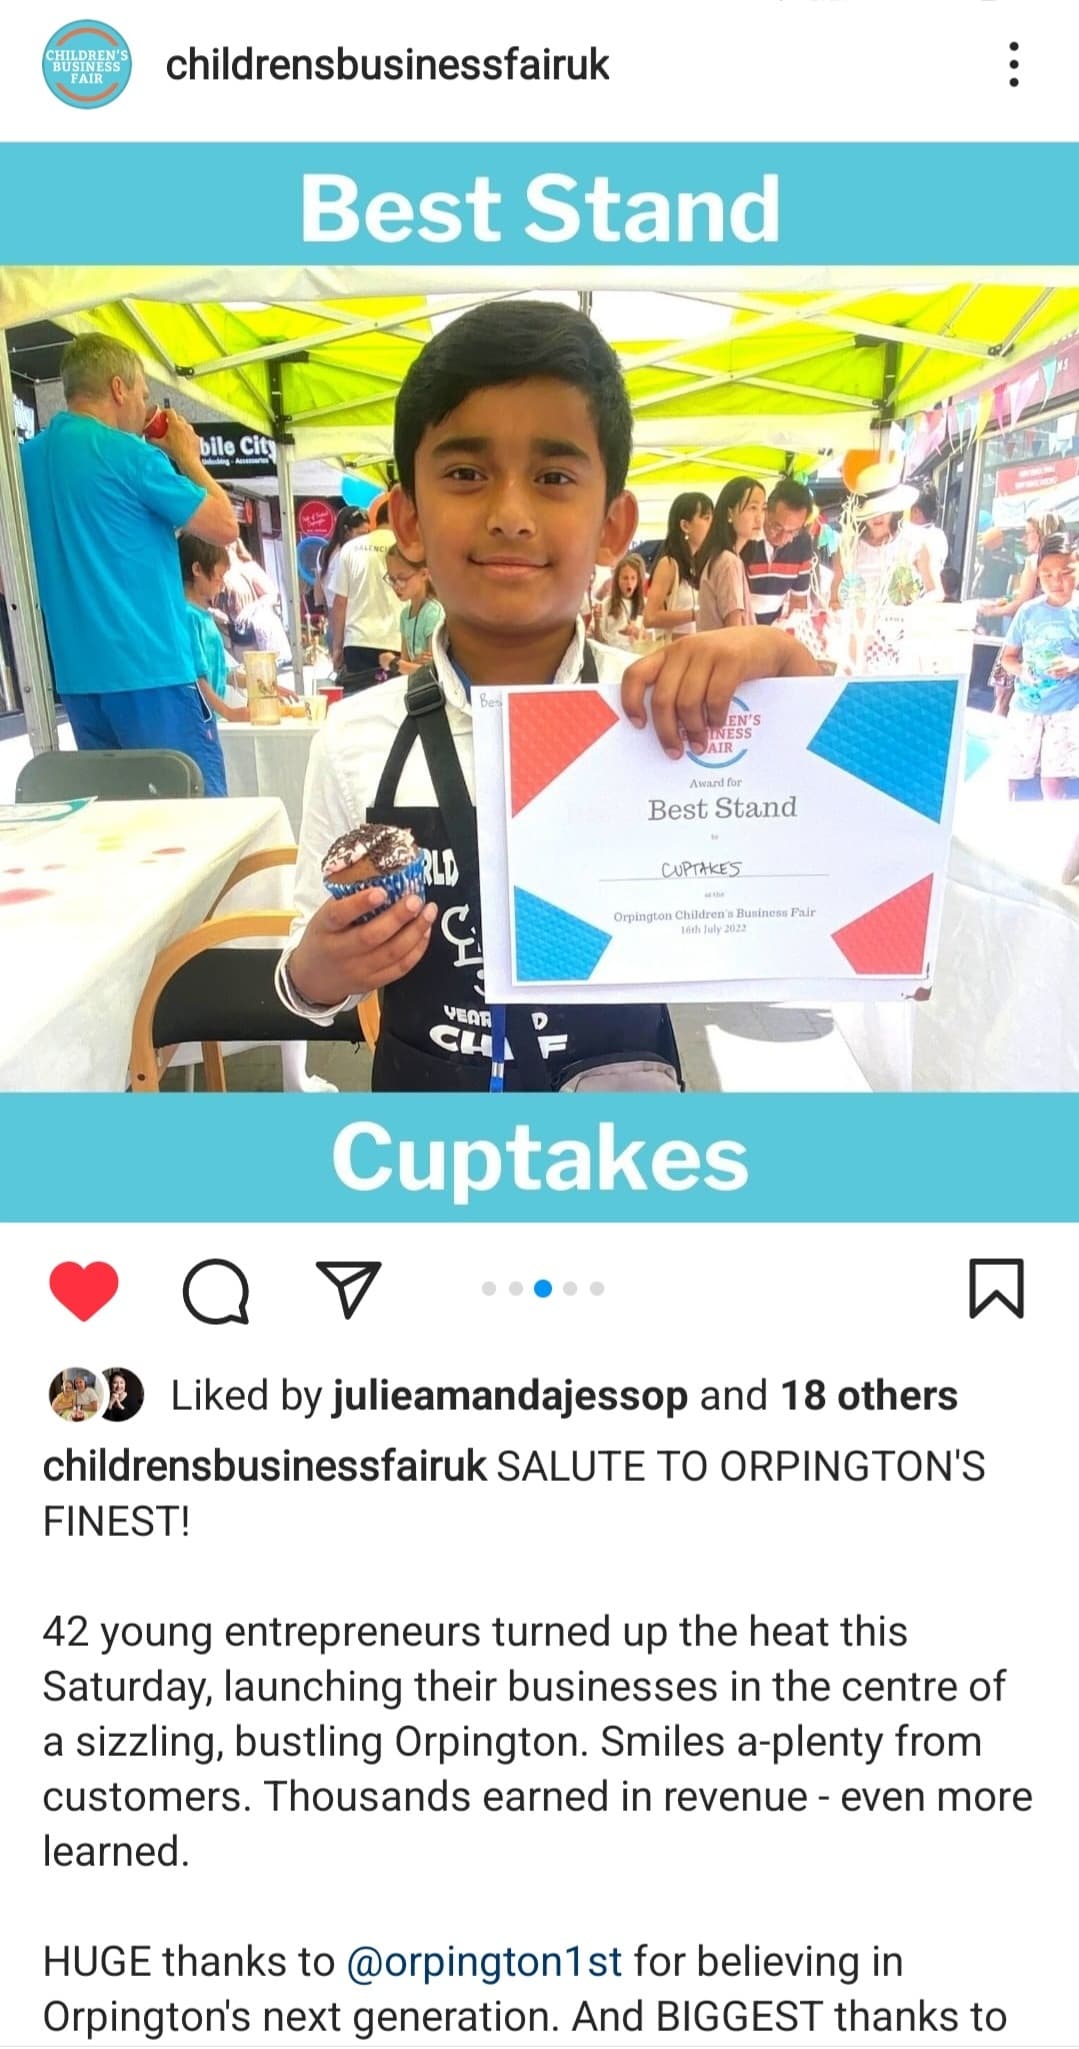 Avaneesh 9 awarded Best Stand for his business Cuptakes